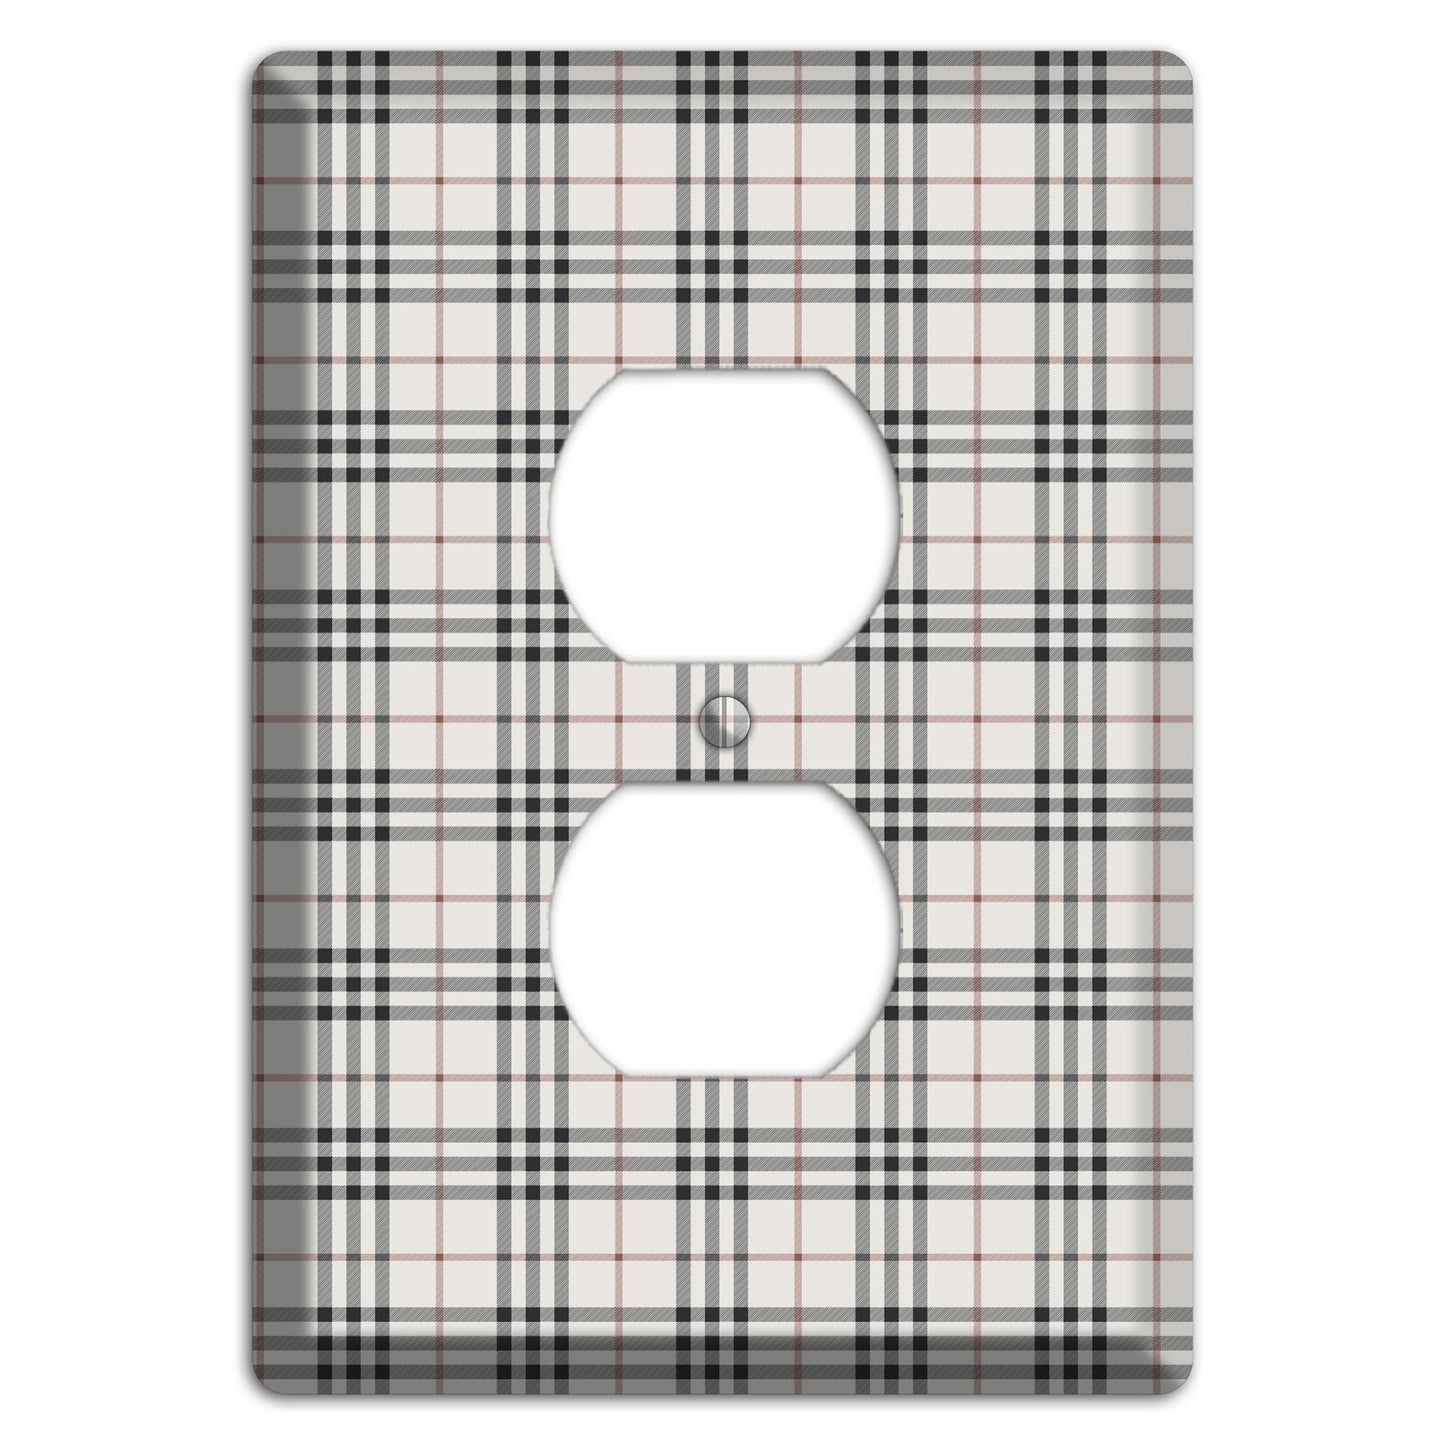 White and Black Plaid Duplex Outlet Wallplate